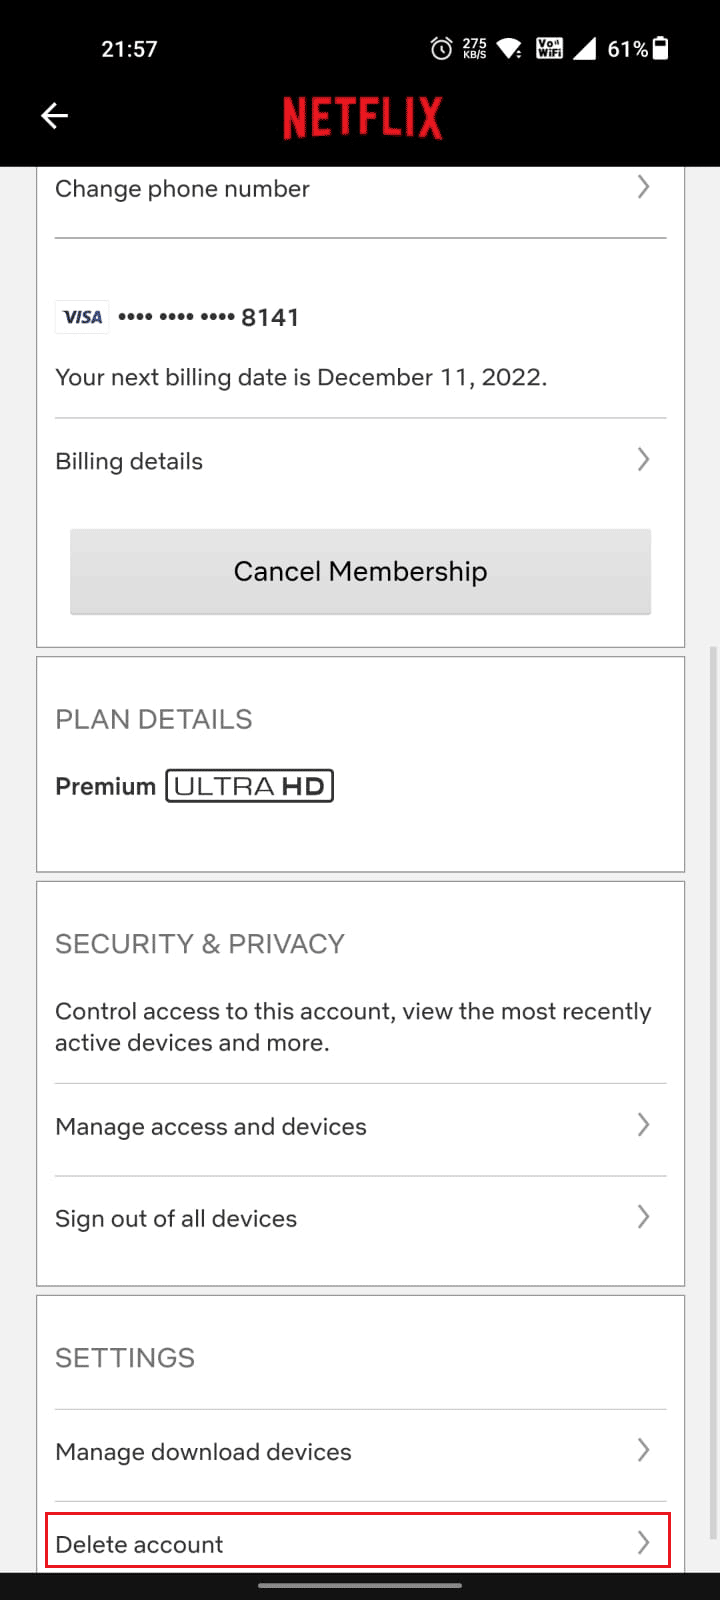 Swipe to the bottom and tap on Delete Account | How to Cancel My Netflix Account